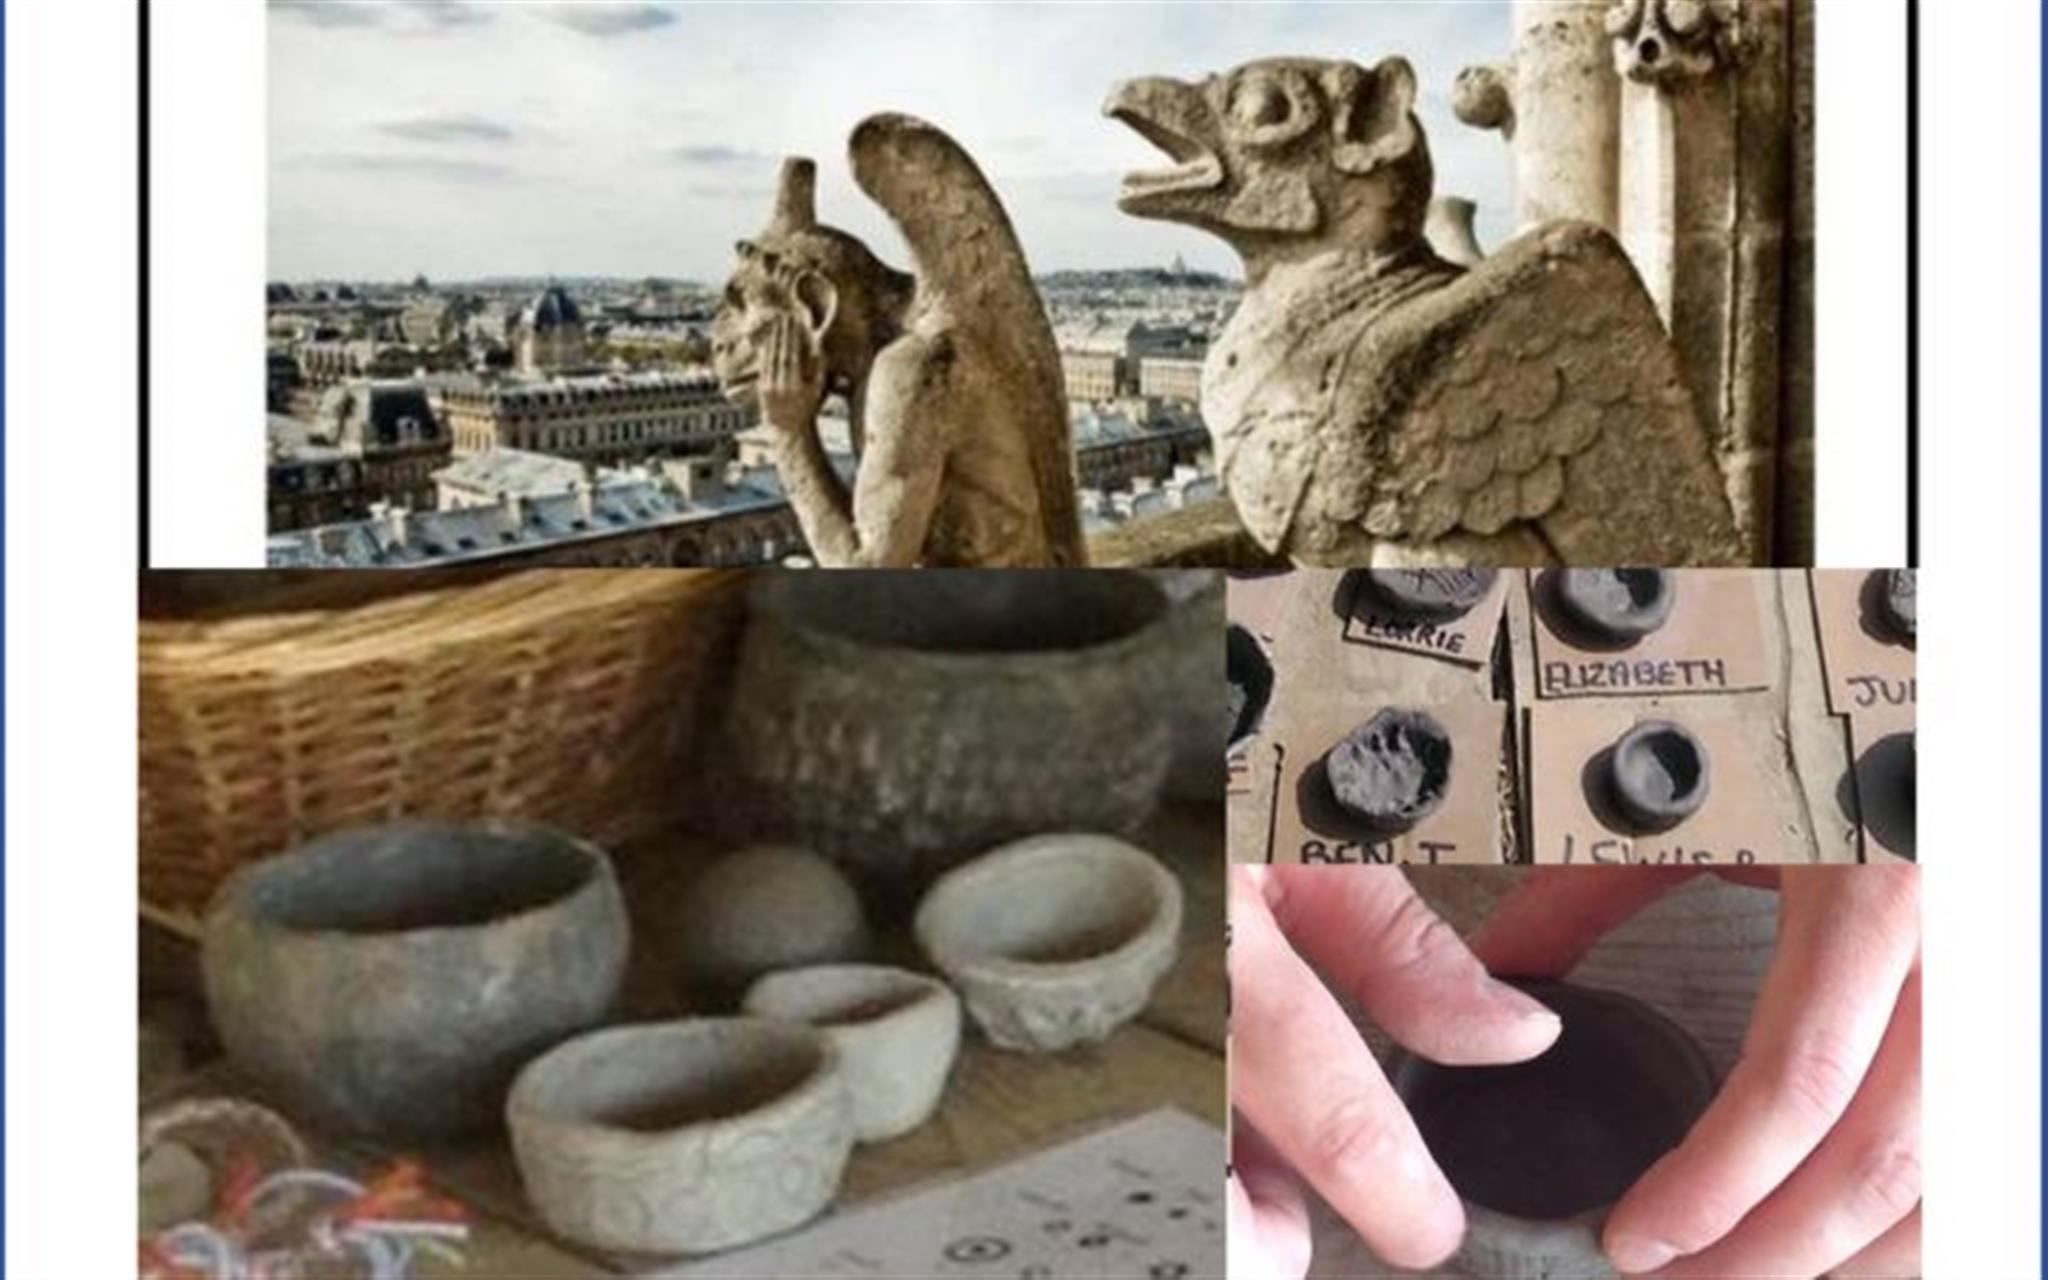 Make your own Medieval Grotesque and Curse/Blessing Bowl